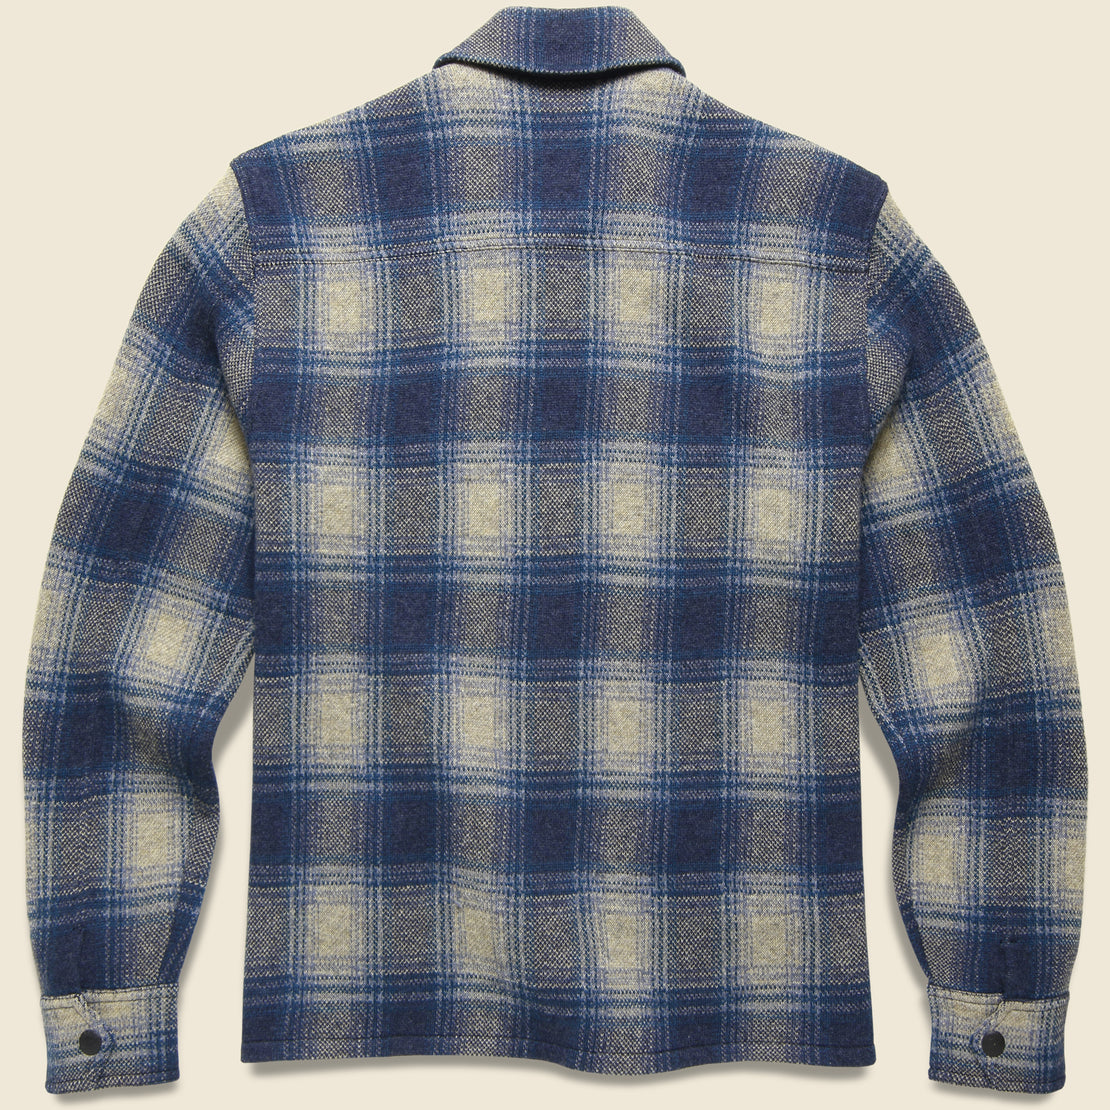 Brown Bear Overshirt - Blue/Yellow Plaid - RRL - STAG Provisions - Outerwear - Shirt Jacket